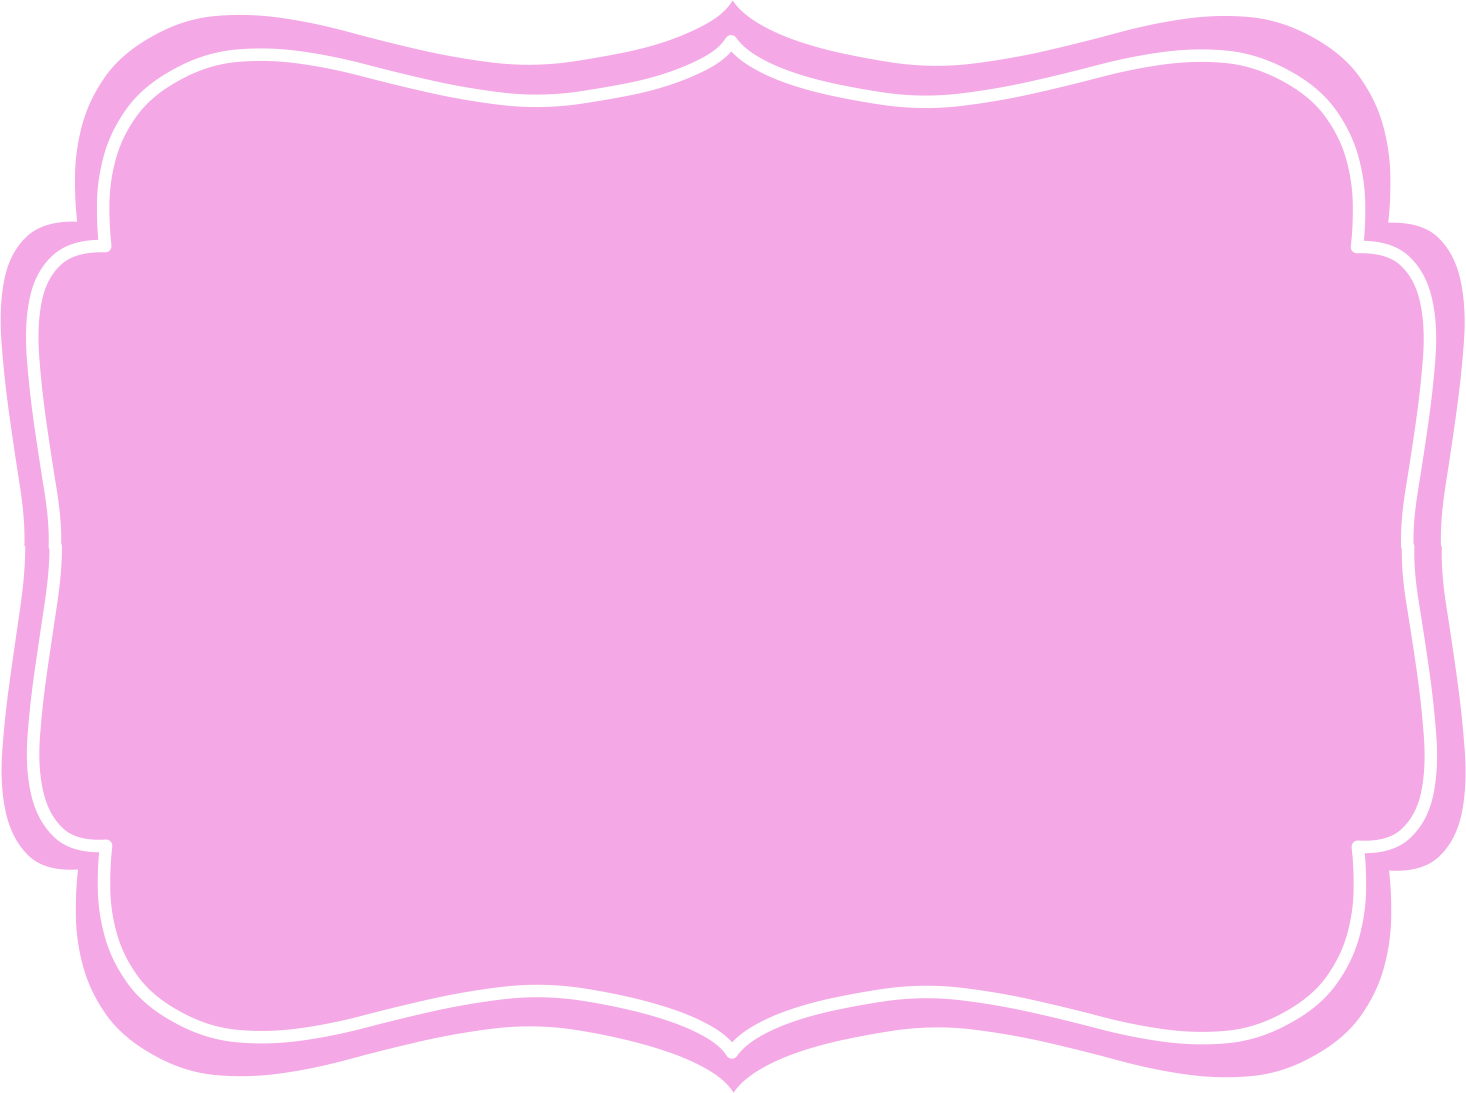  collection of high. Label clipart pink